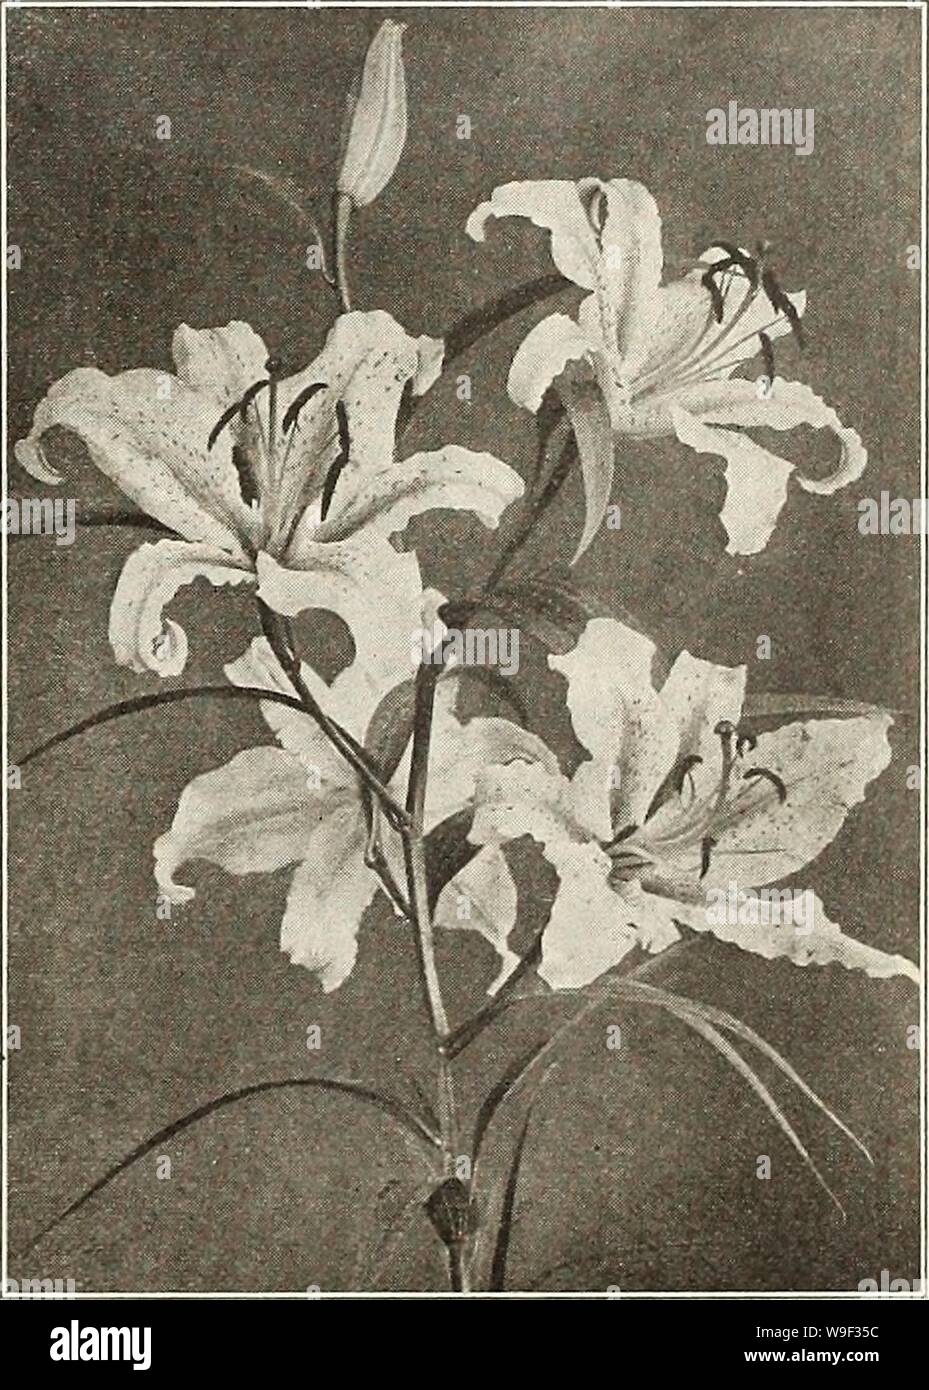 Archive image from page 12 of Currie's bulbs and plants . Currie's bulbs and plants : autumn 1916  curriesbulbsplan19curr 9 Year: 1916 ( Lilies BERMUDA EASTER LILY. CANDIDUM, FORMOSUM AND HARRISII ARE READY TO SHIP IN AUGUST; THE OTHERS IN OCTOBER OR NOVEMBER. All of the species named, with the exception of Harrisii, are perfectly hardy. L. Candidum should be planted in September or early in October, in deep, rich, sandy soil, covering1 the bulbs about 3 inches. The Japanese sorts should be planted in November, covering the bulbs about 9 Inches. LONGIFLORUM GIGANTEUM (Dark Stem). Flowers trump Stock Photo